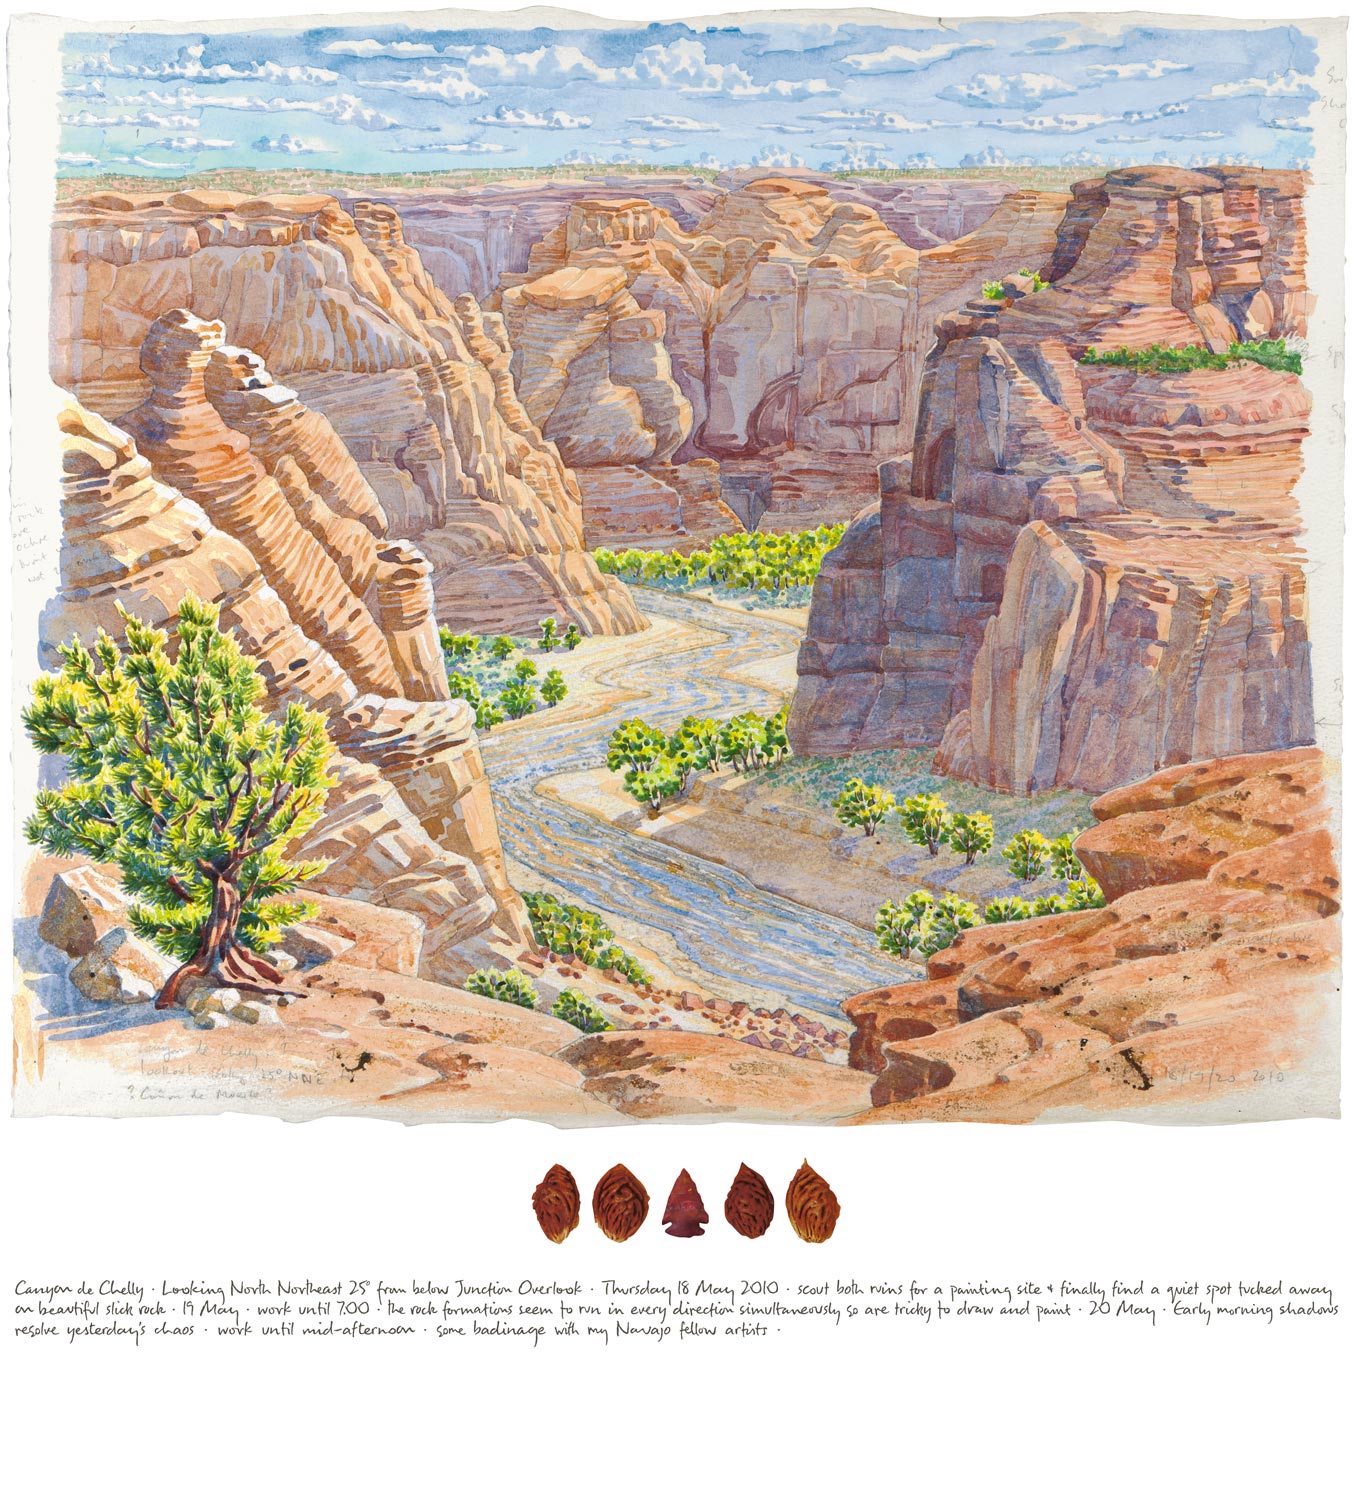   Tony Foster ,  Canyon de Chelly Looking 25° North Northeast from below Junction Overlook , 2010 